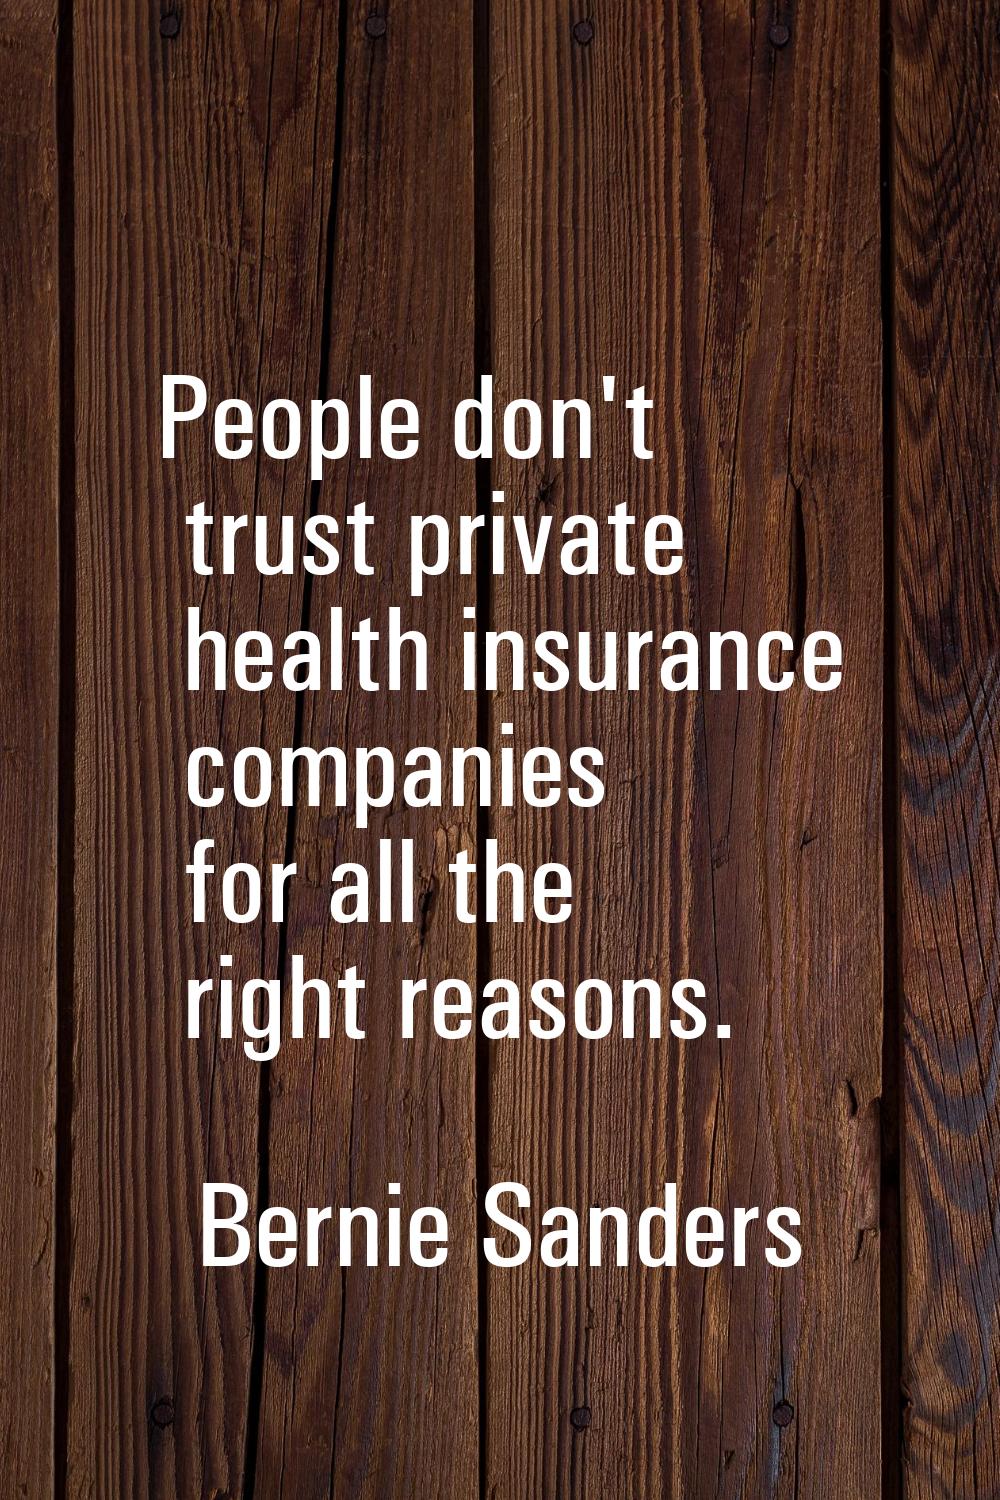 People don't trust private health insurance companies for all the right reasons.